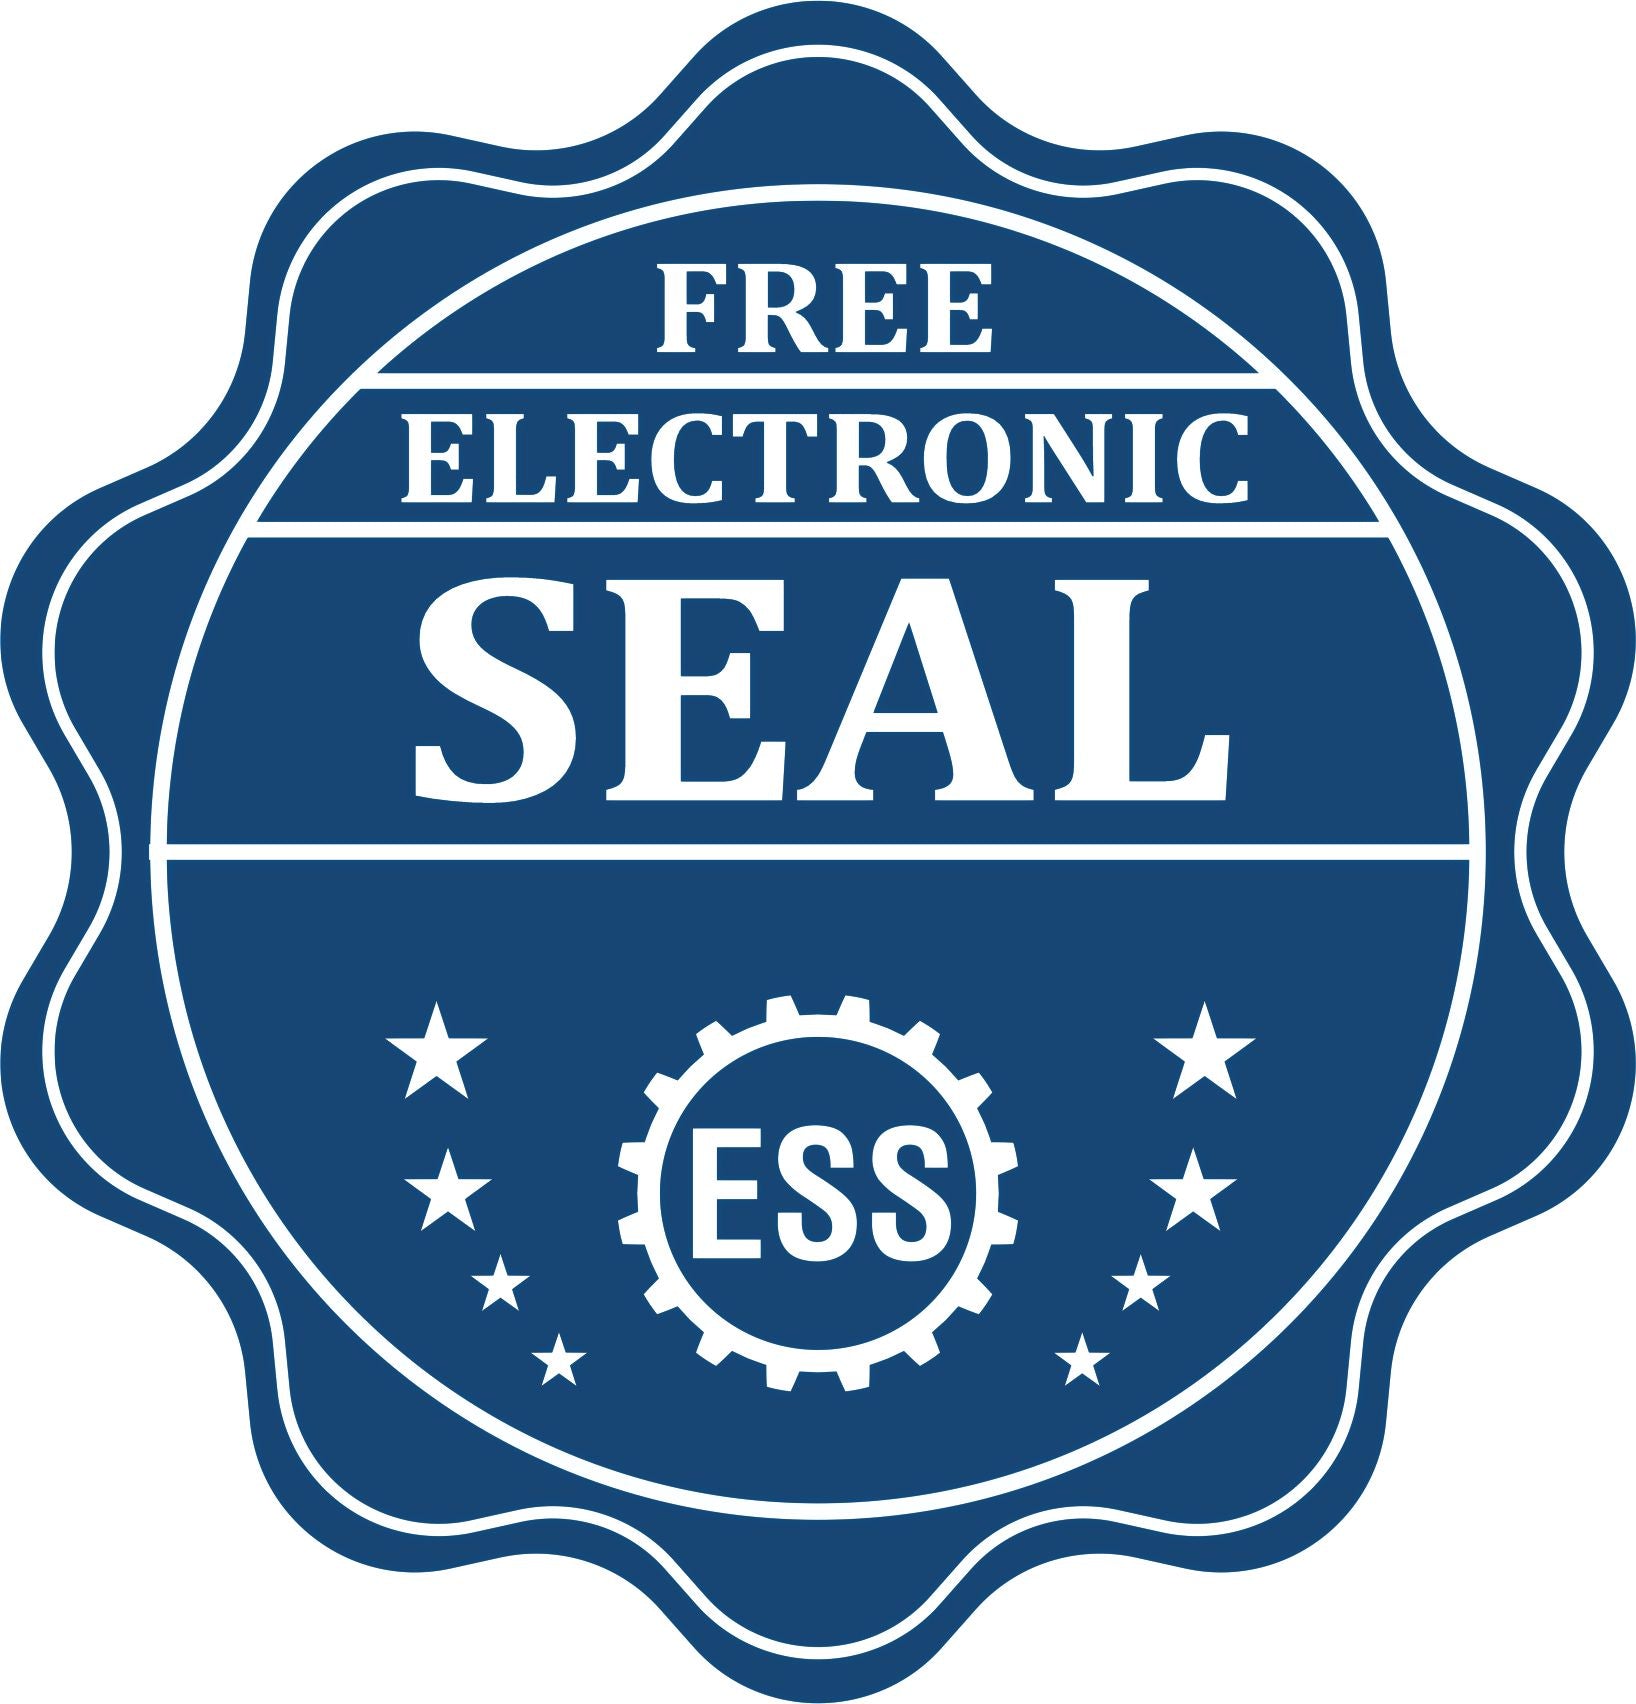 A badge showing a free electronic seal for the Premium MaxLight Pre-Inked New Hampshire Engineering Stamp with stars and the ESS gear on the emblem.